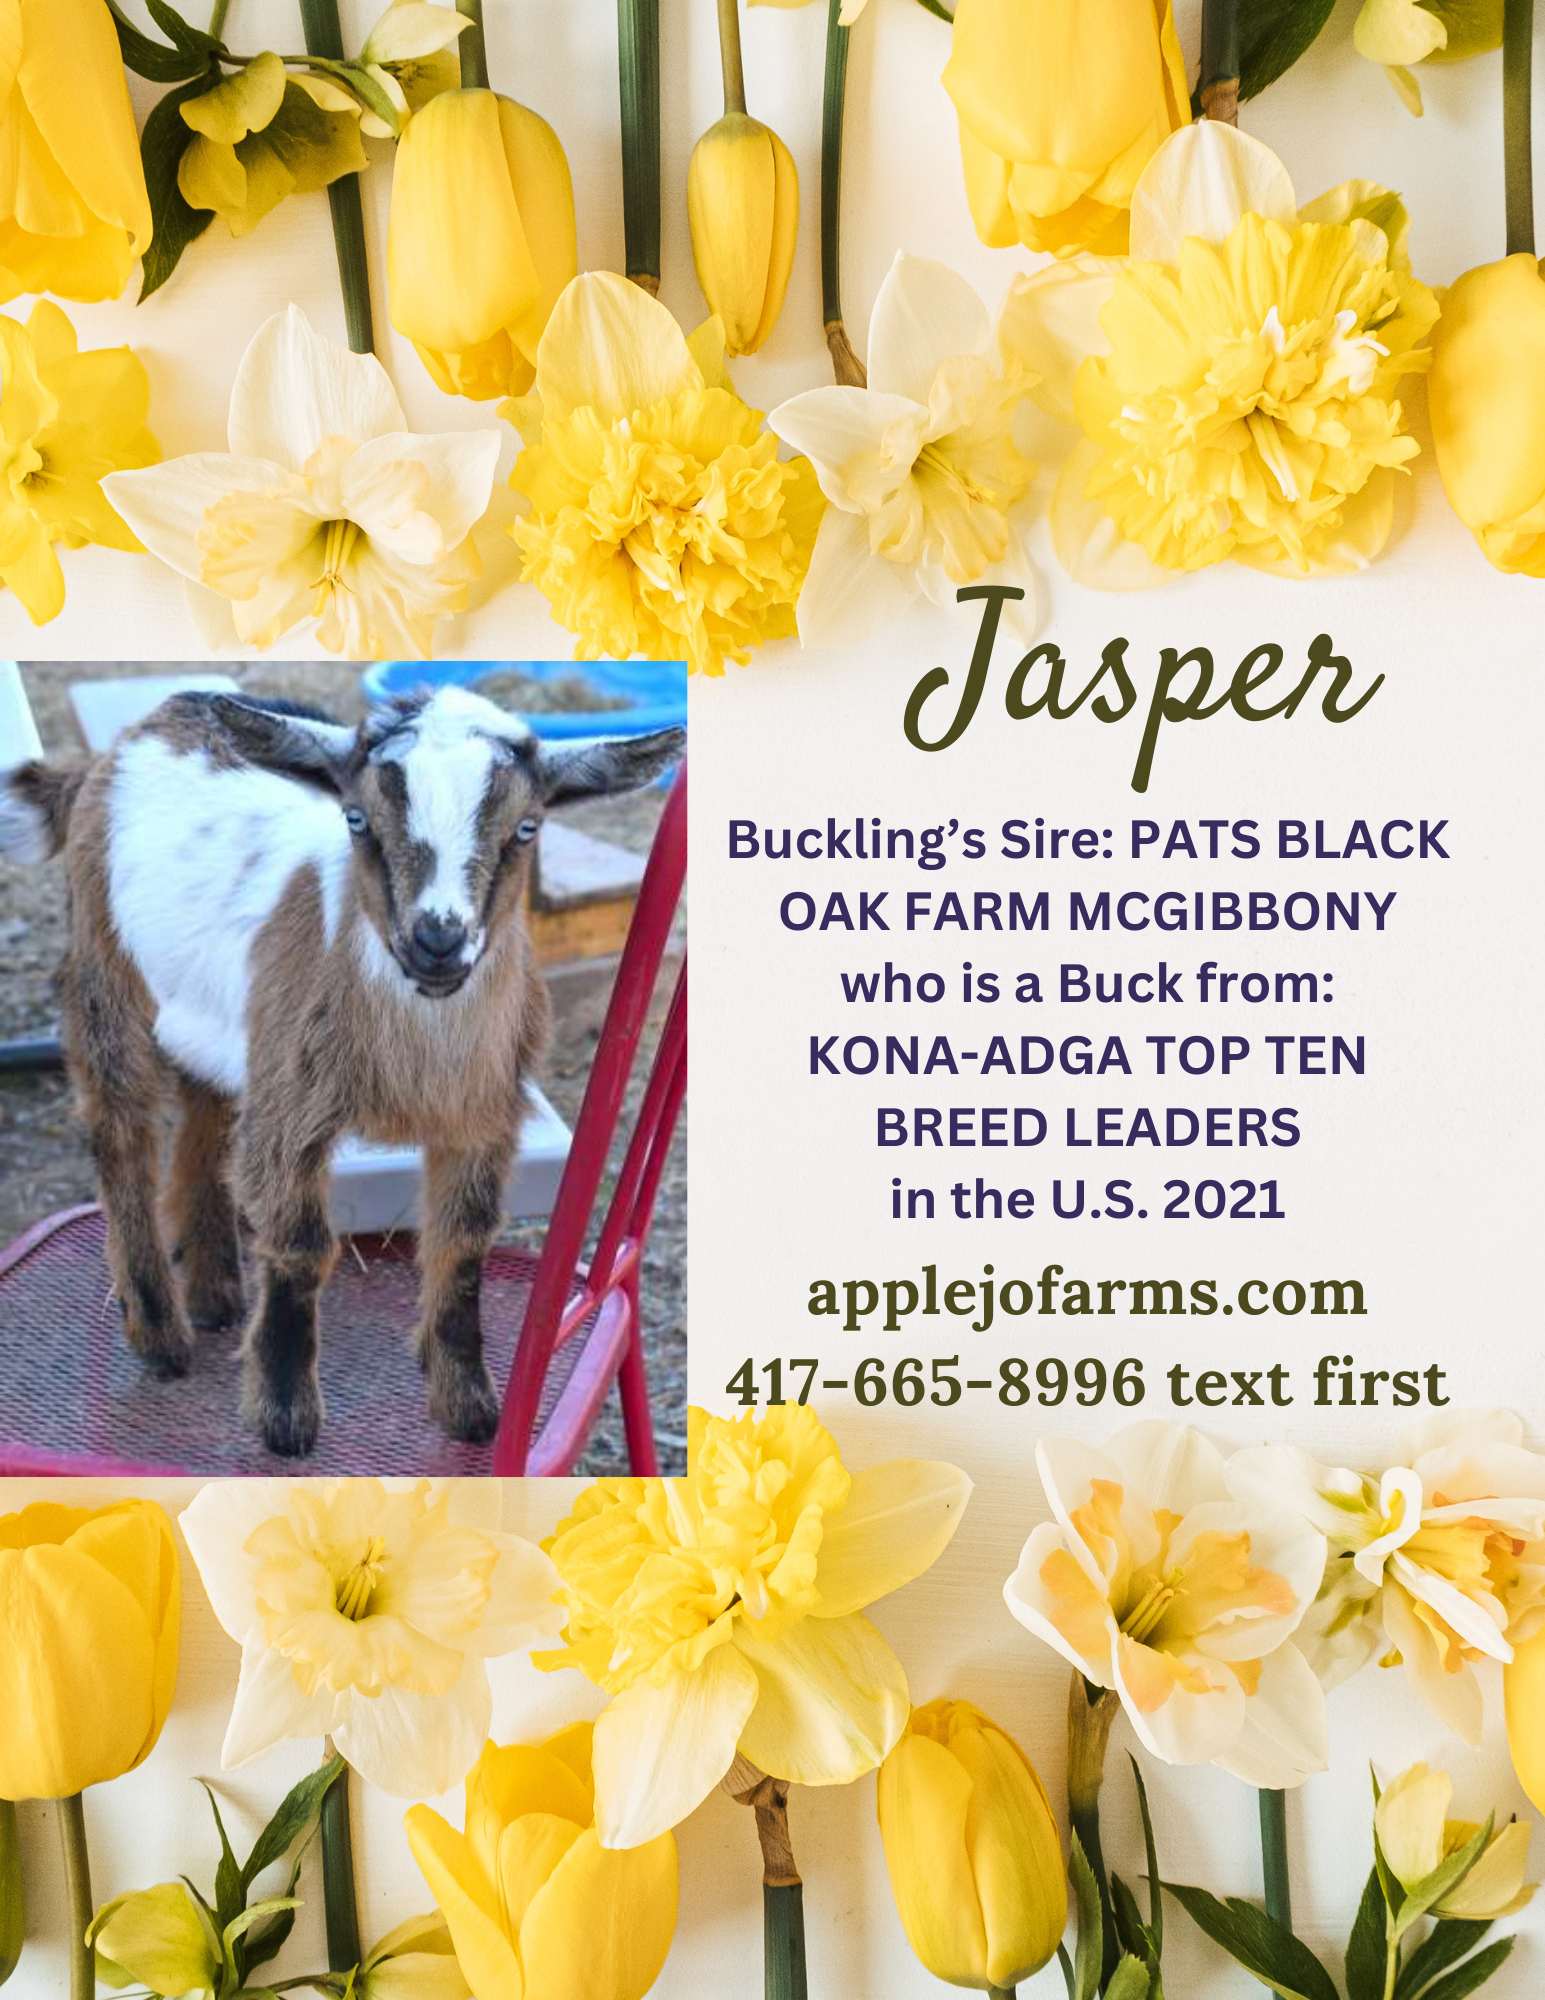 AppleJo Farms- Eldon MO 1 Blue Eyed sweet natured buckling with a knockout sire! 417-665-8996 link to website page: https://applejofarms.com/item_172/Jasper-Bellas-Buckling.htm